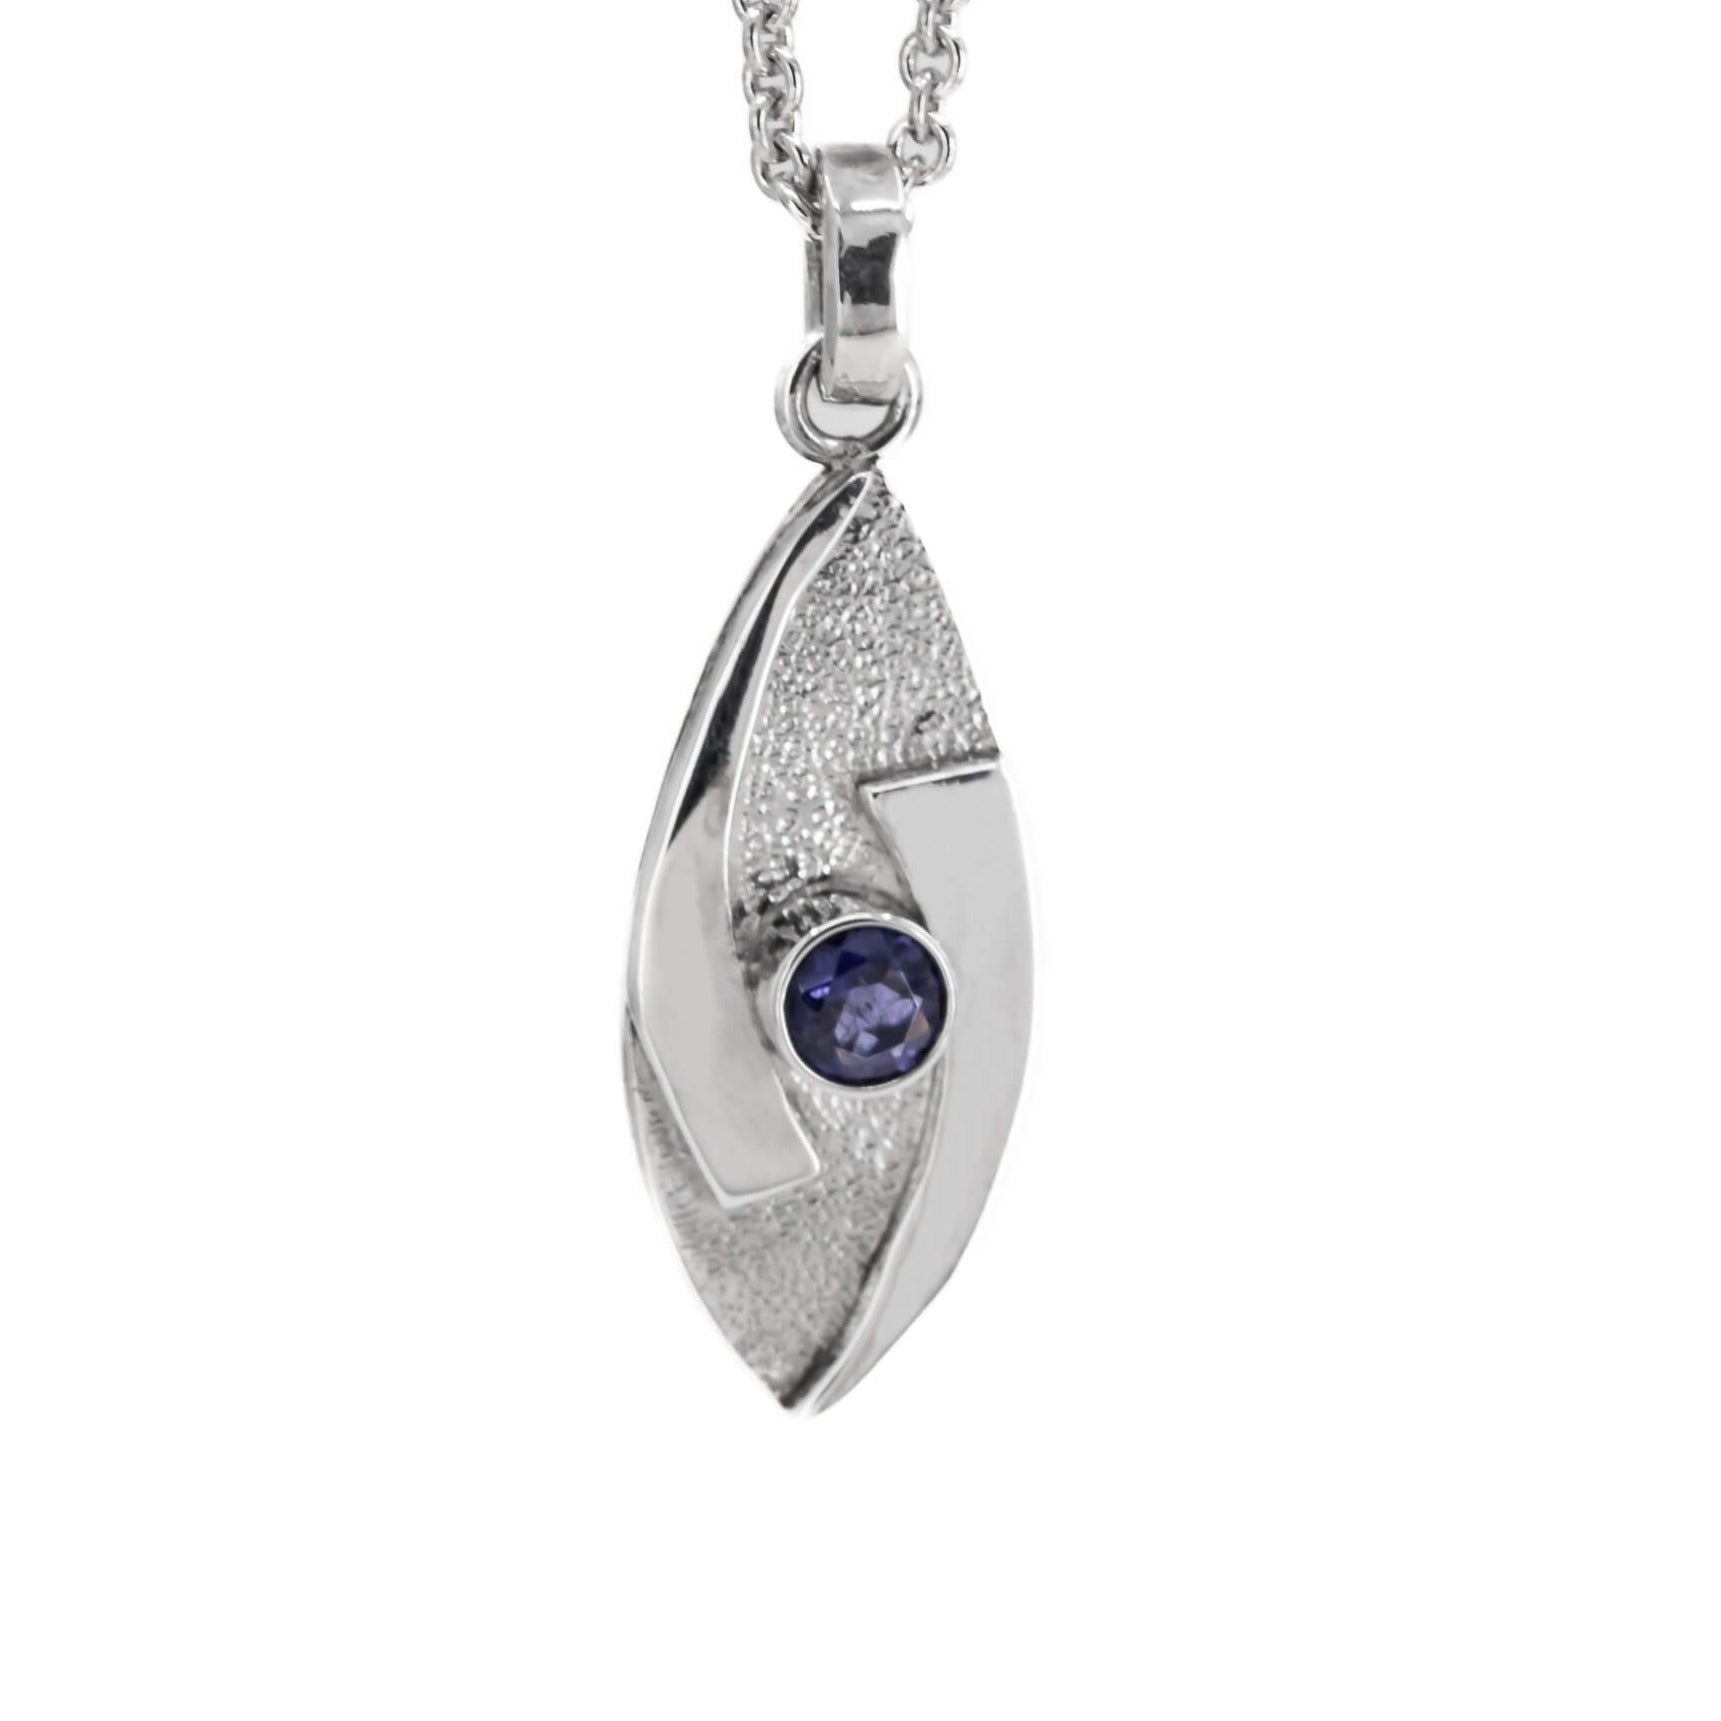 small hugged pendant necklace in sterling silver with a stardust texture and a 4mm Iolite faceted stone